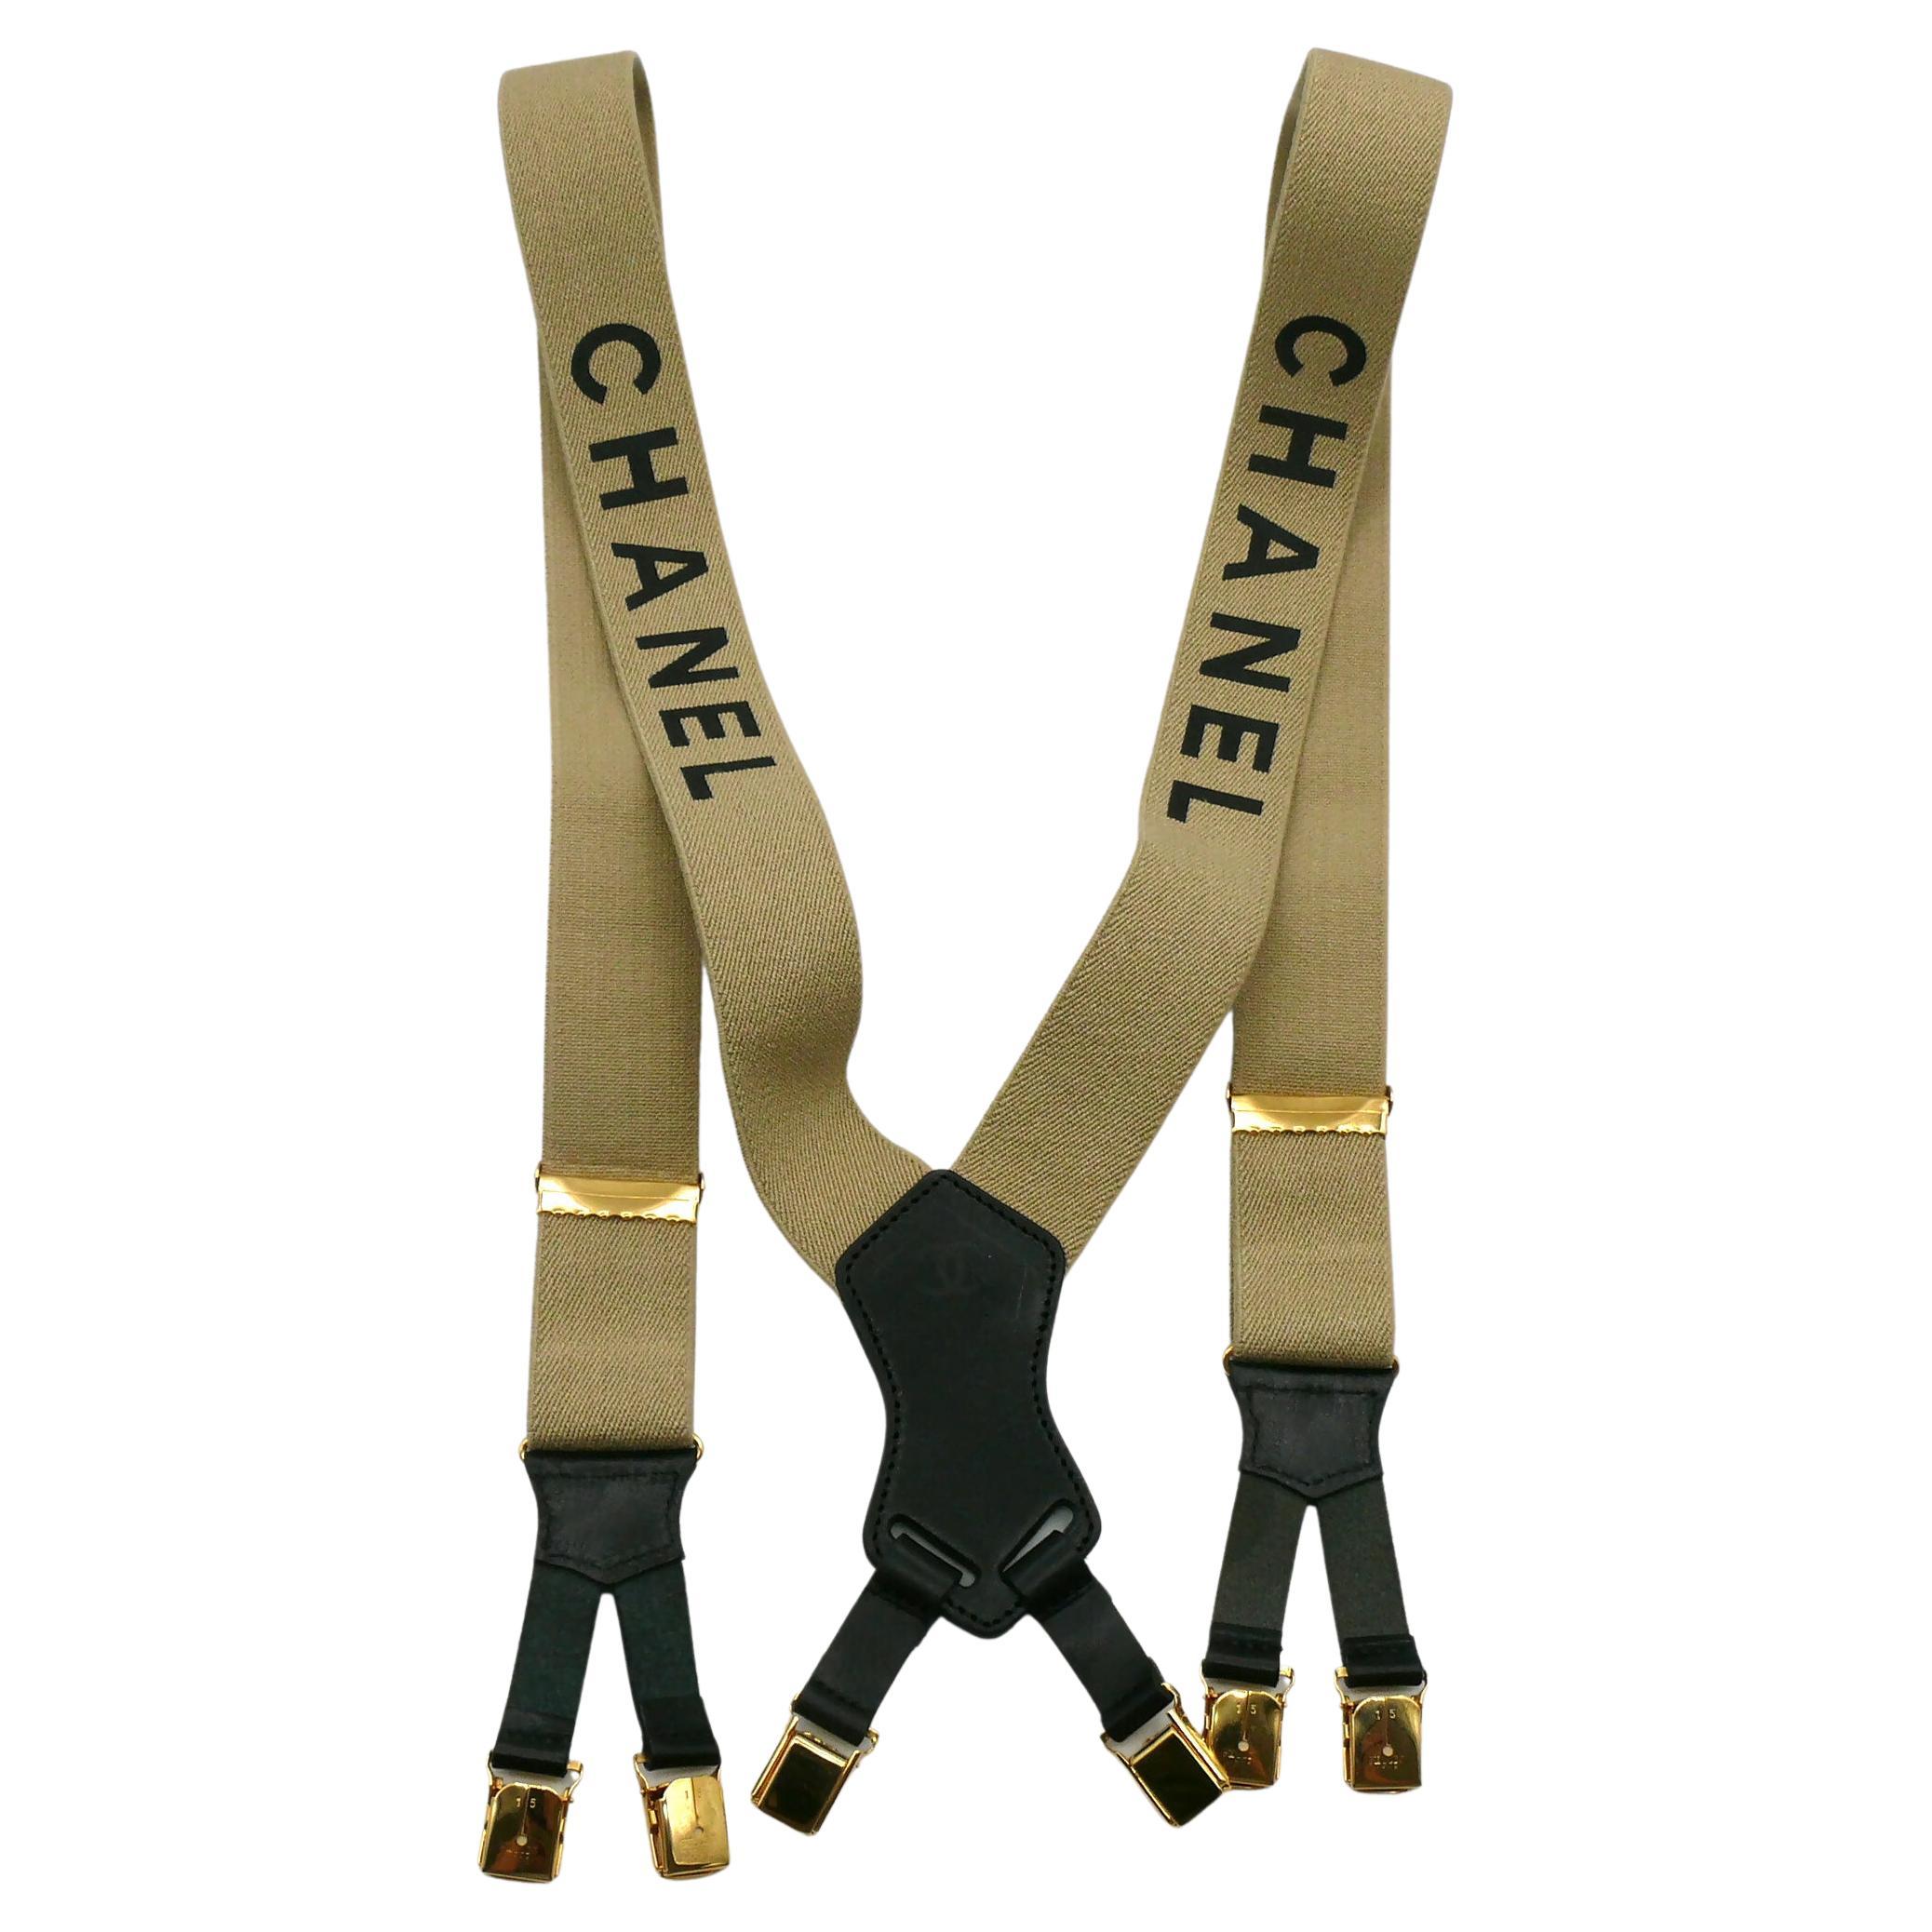 CHANEL by KARL LAGERFELD Vintage Iconic Light Brown and Black Suspenders, 1994 im Angebot